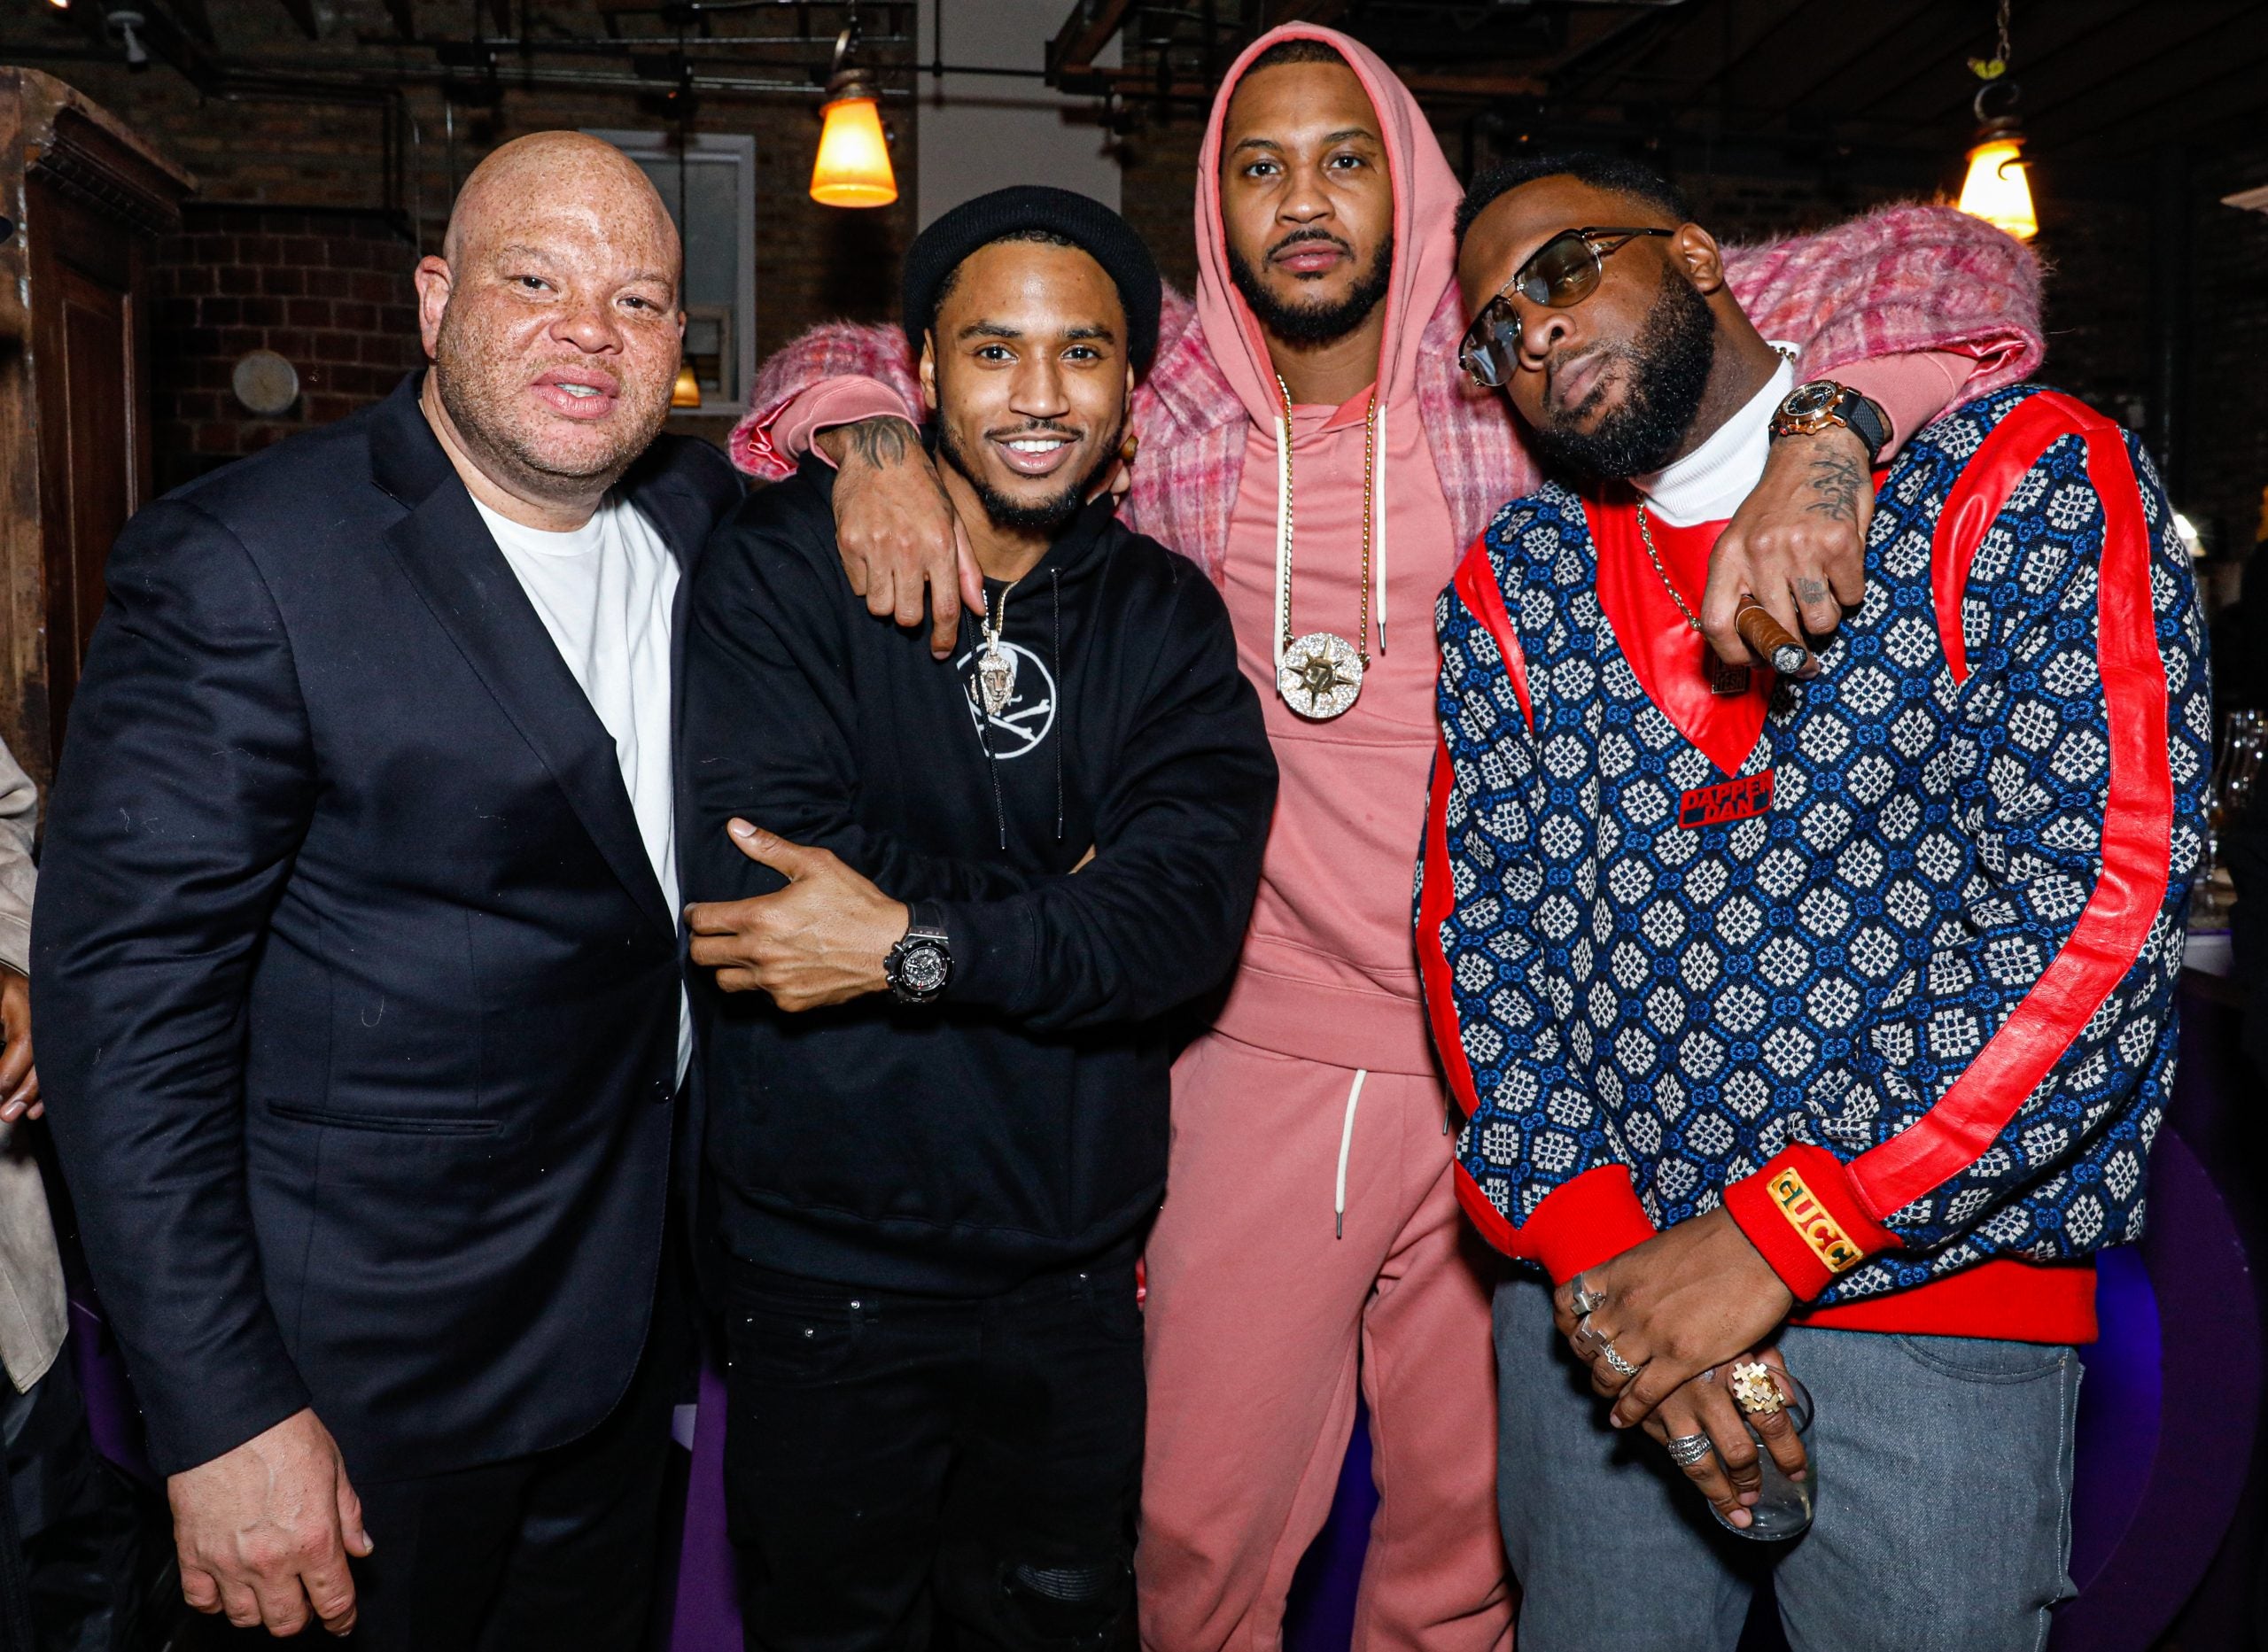 Celebs Take Chicago During NBA All-Star Weekend